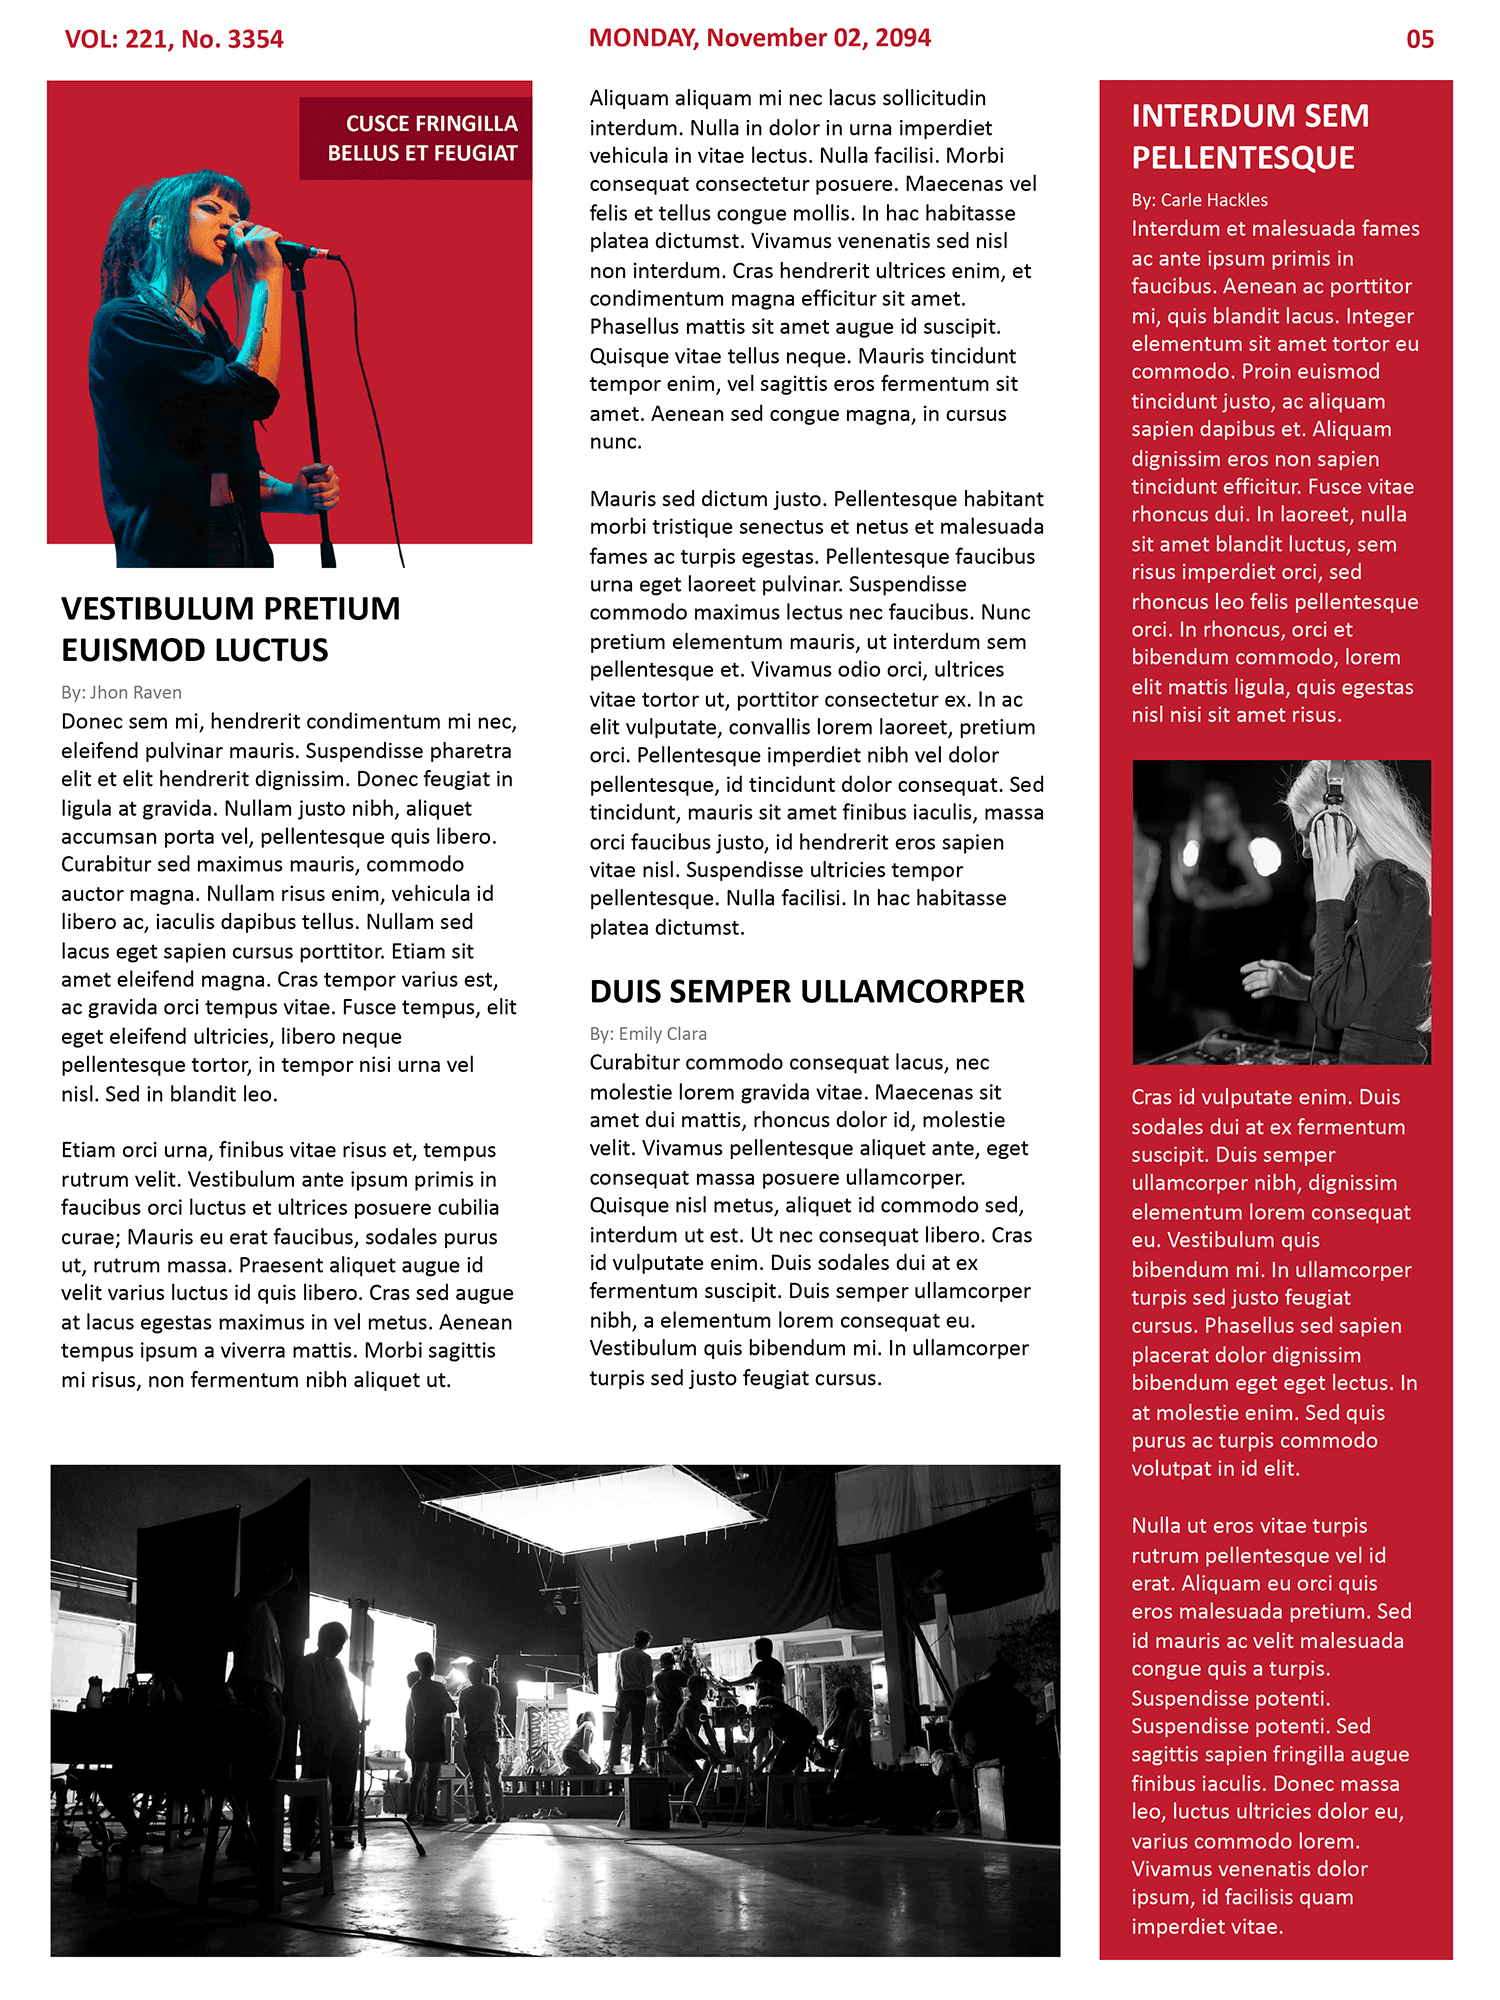 Modern Business Newspaper Template - Page 5